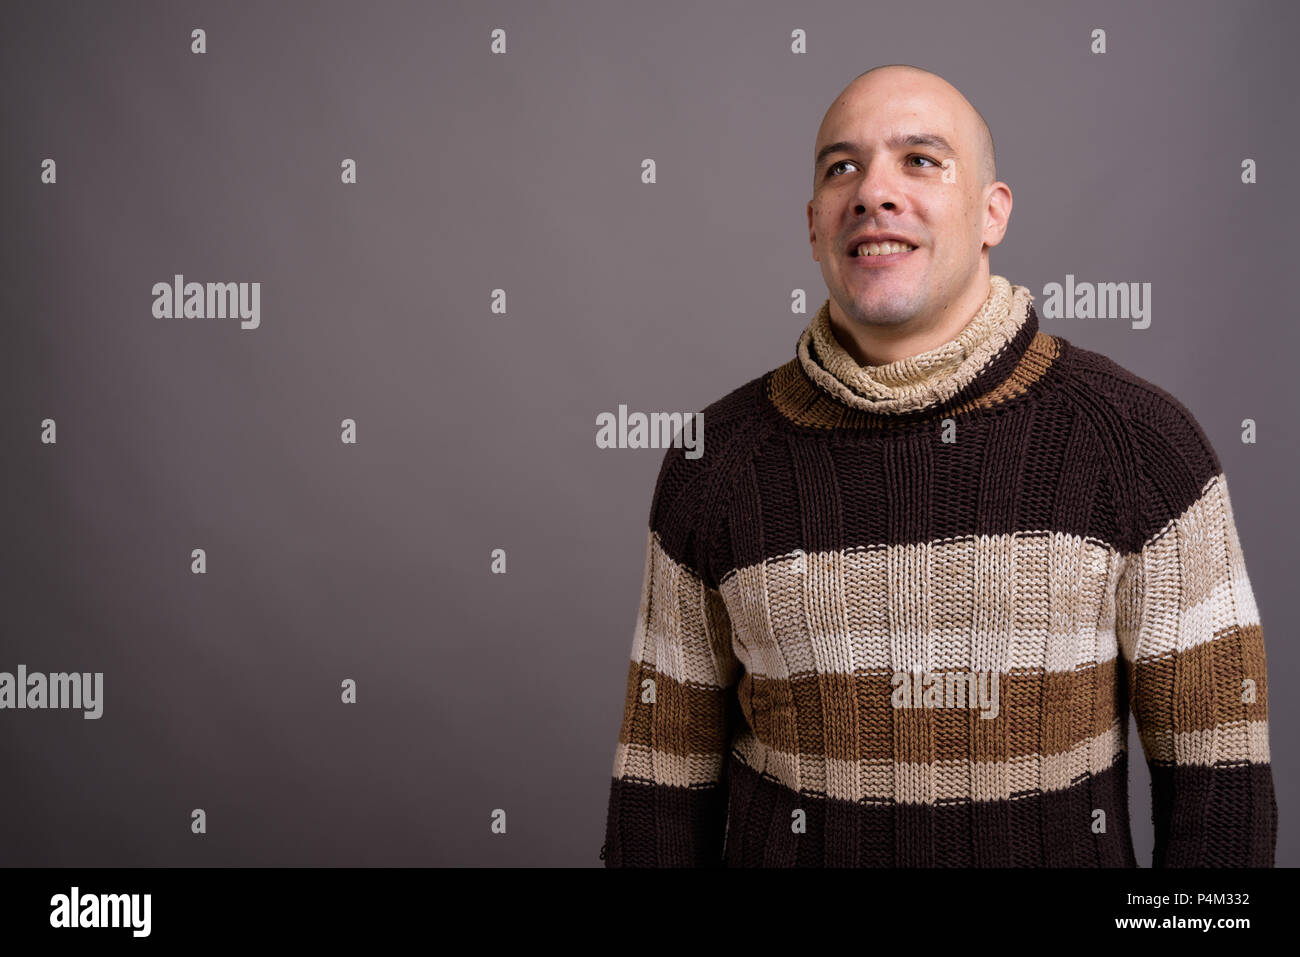 Handsome bald man against gray background Stock Photo